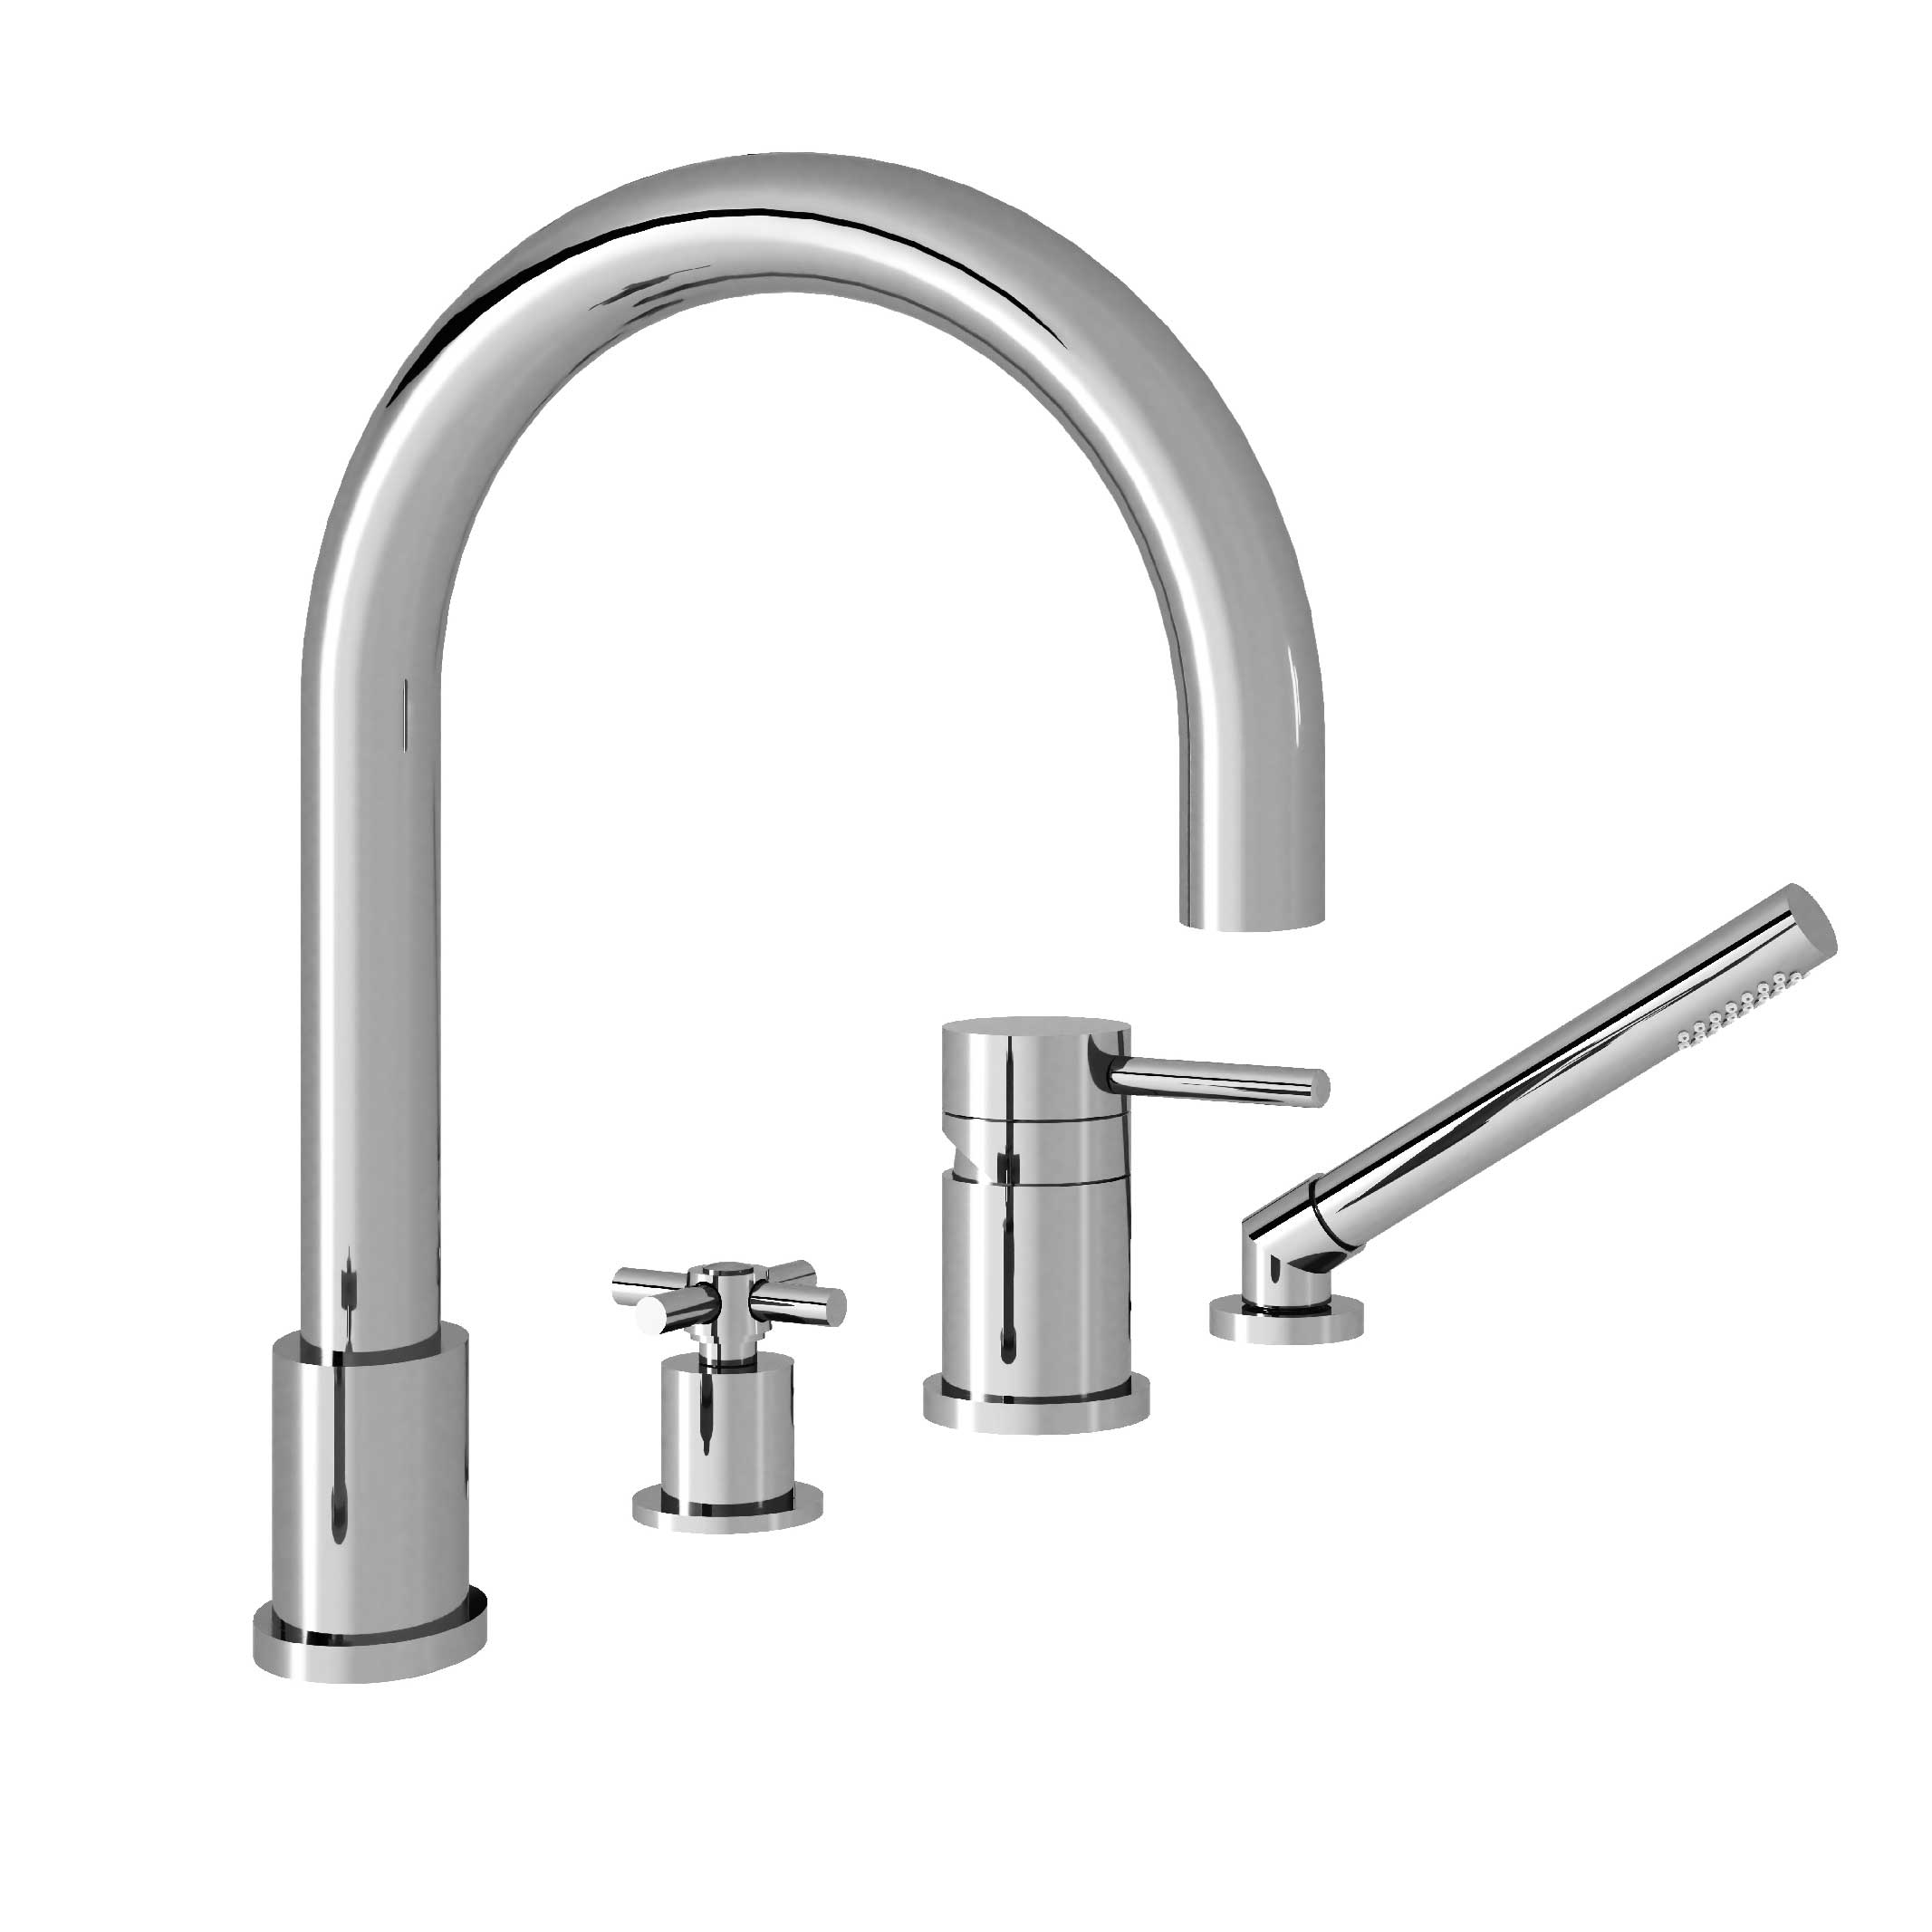 M91-3304M 4-hole single-lever bath and shower mixer